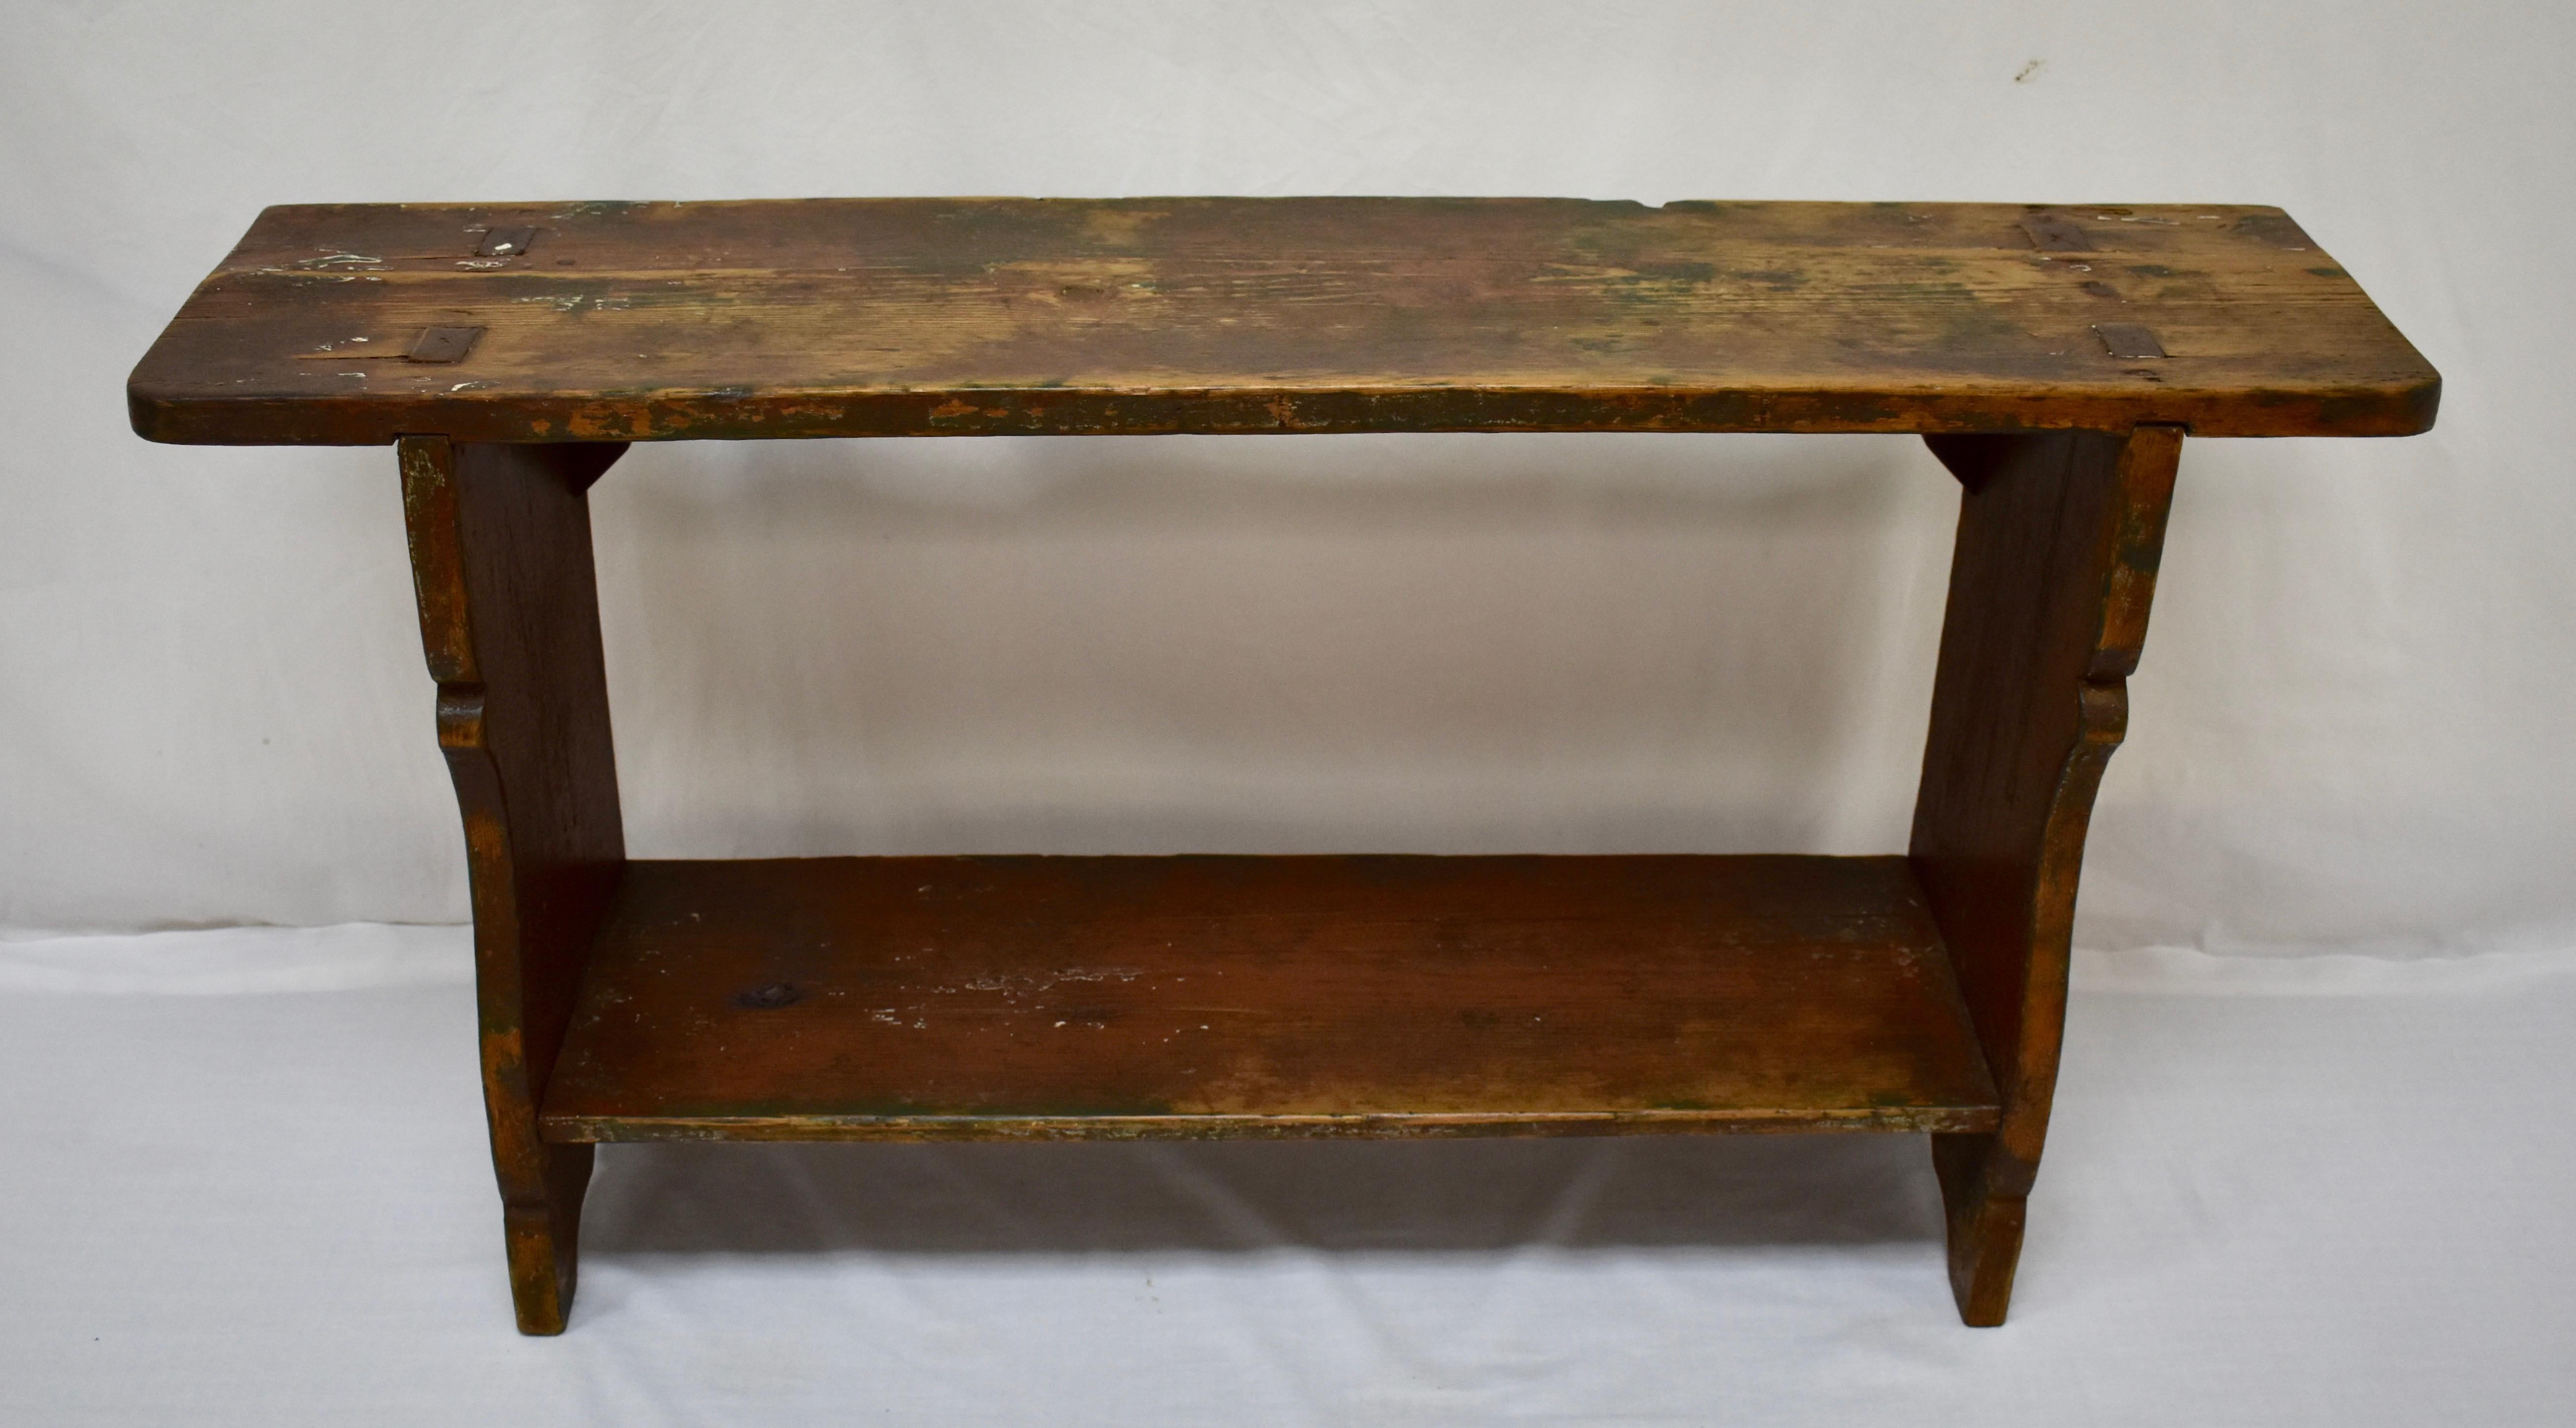 This little bench had to be sturdy to bear the large vessels that were stored upon it and have left their imprint on its surfaces. So, the bottom shelf is dovetailed into the sides which are dovetailed and through-tenoned into the top. An original